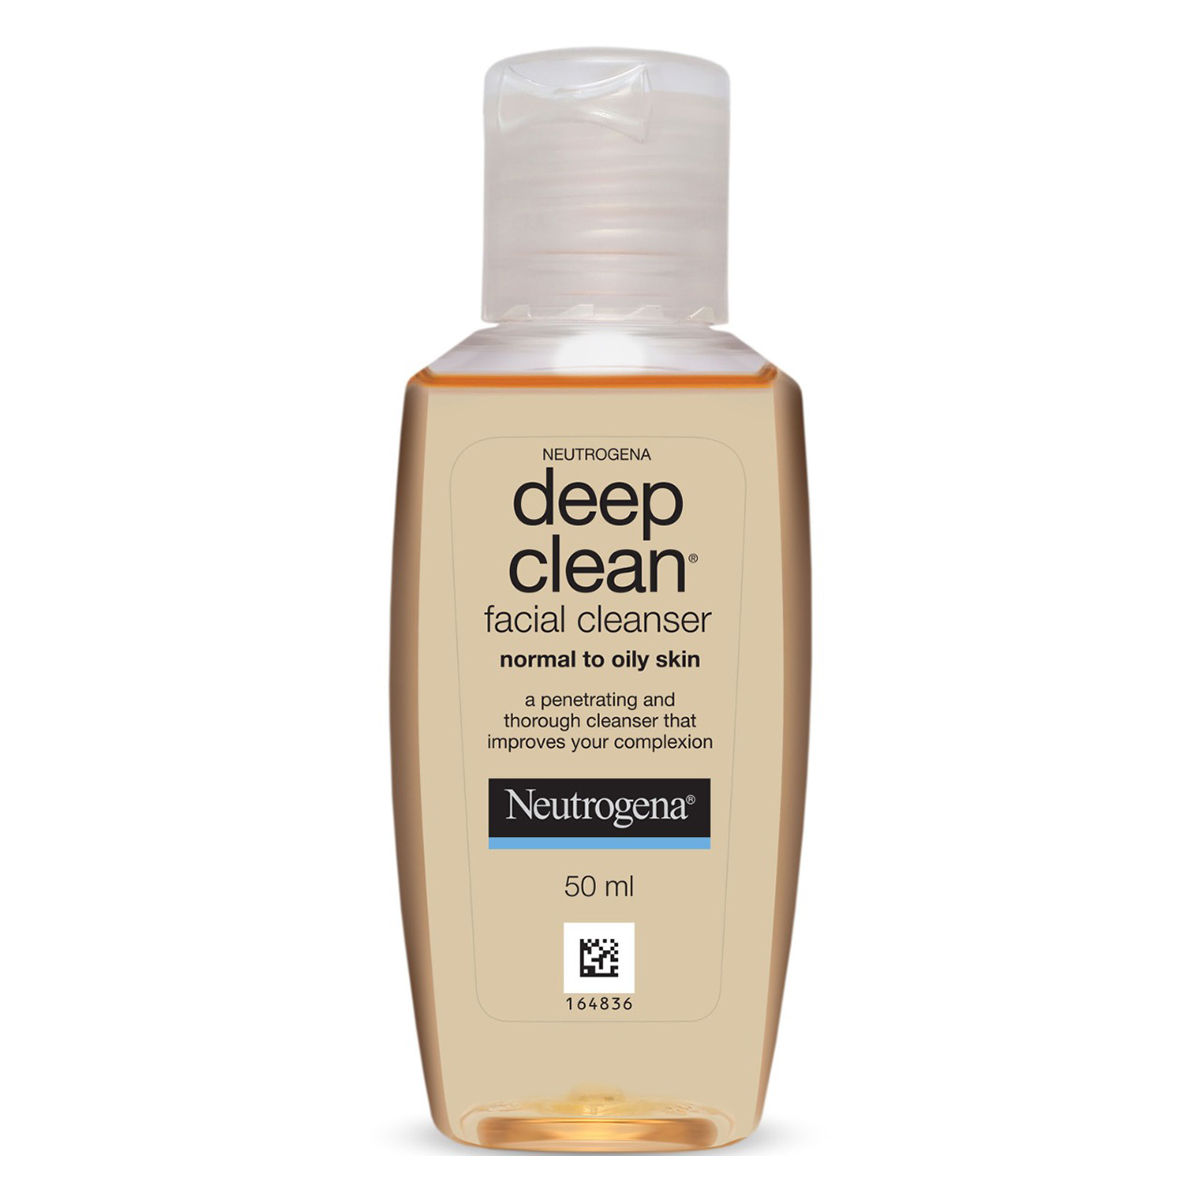 Buy Neutrogena Deep Clean Facial Cleanser For Normal to Oily Skin, 50 ml Online